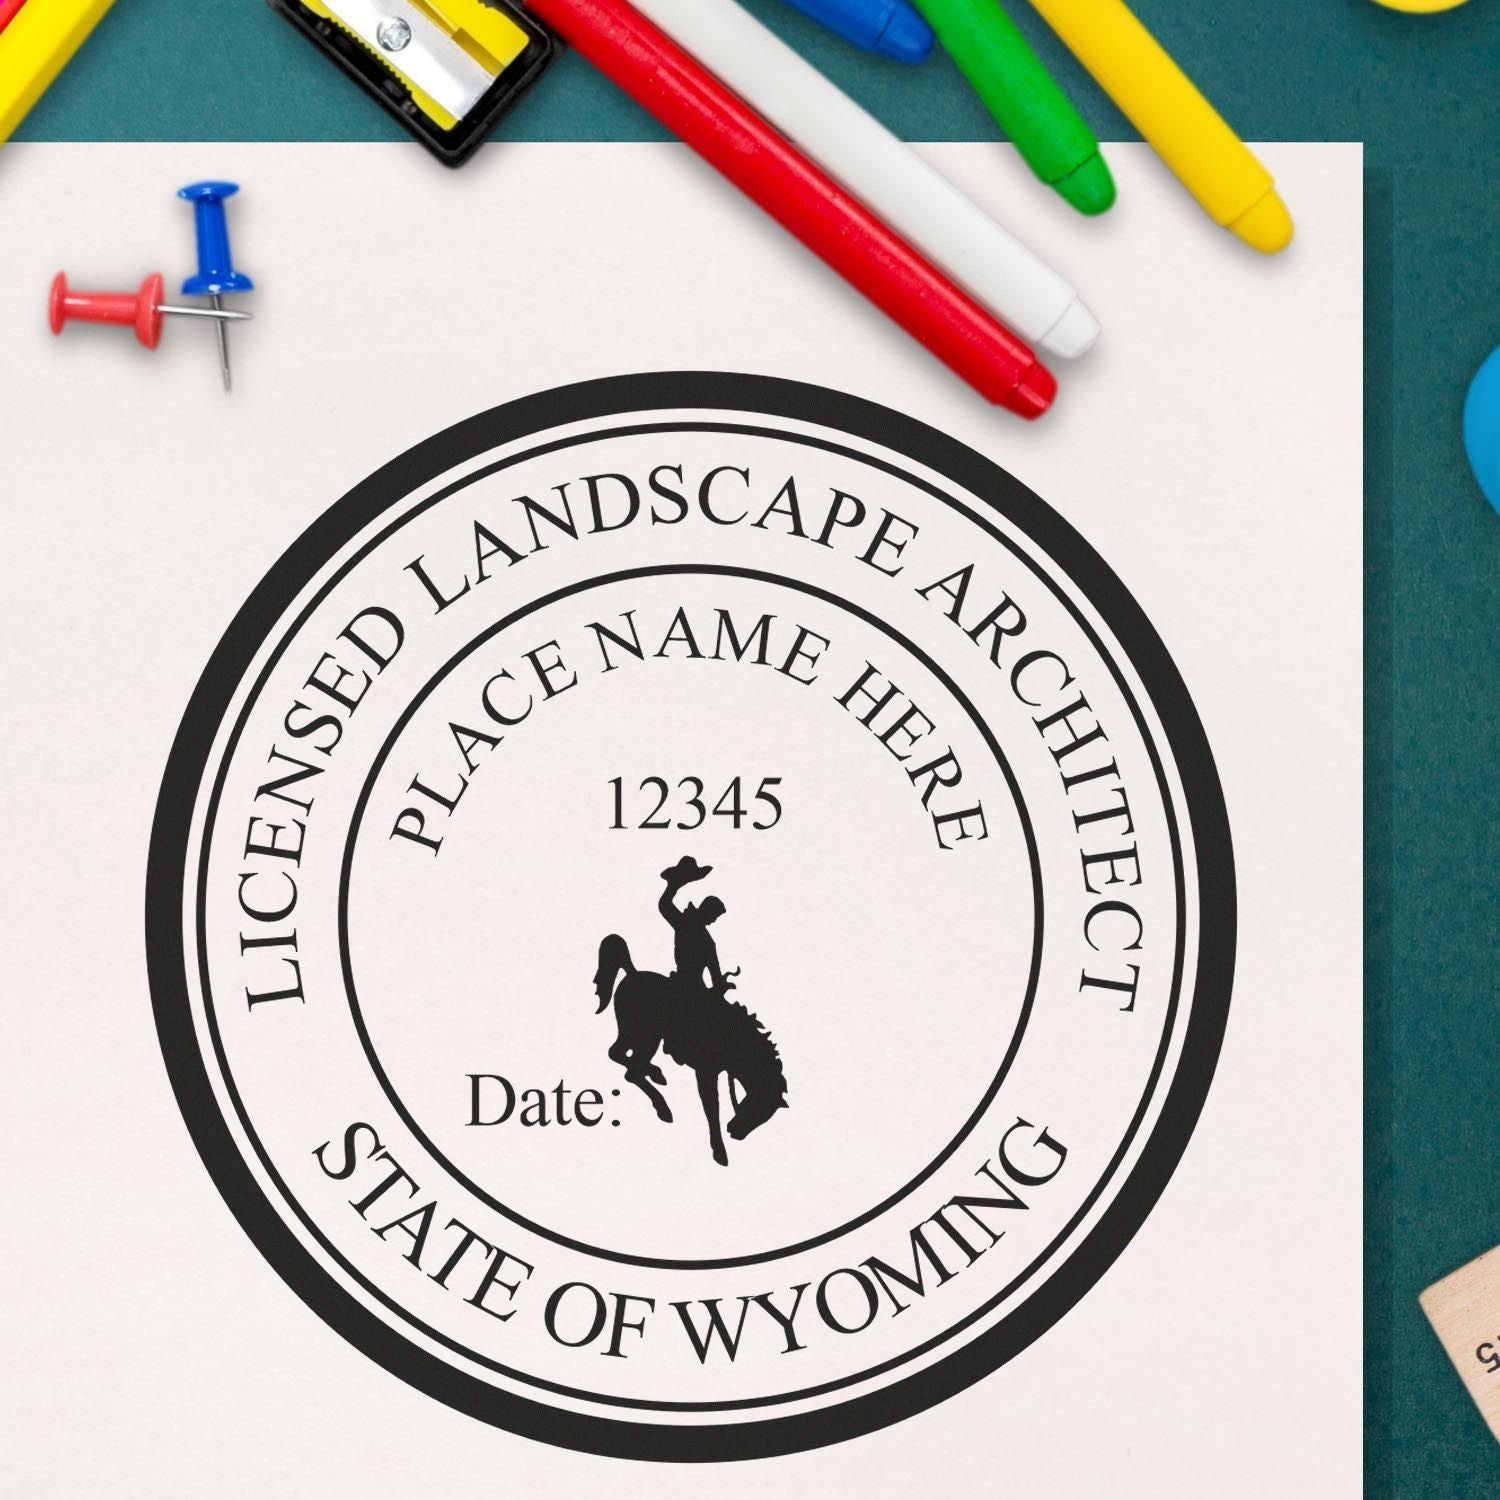 The main image for the Digital Wyoming Landscape Architect Stamp depicting a sample of the imprint and electronic files